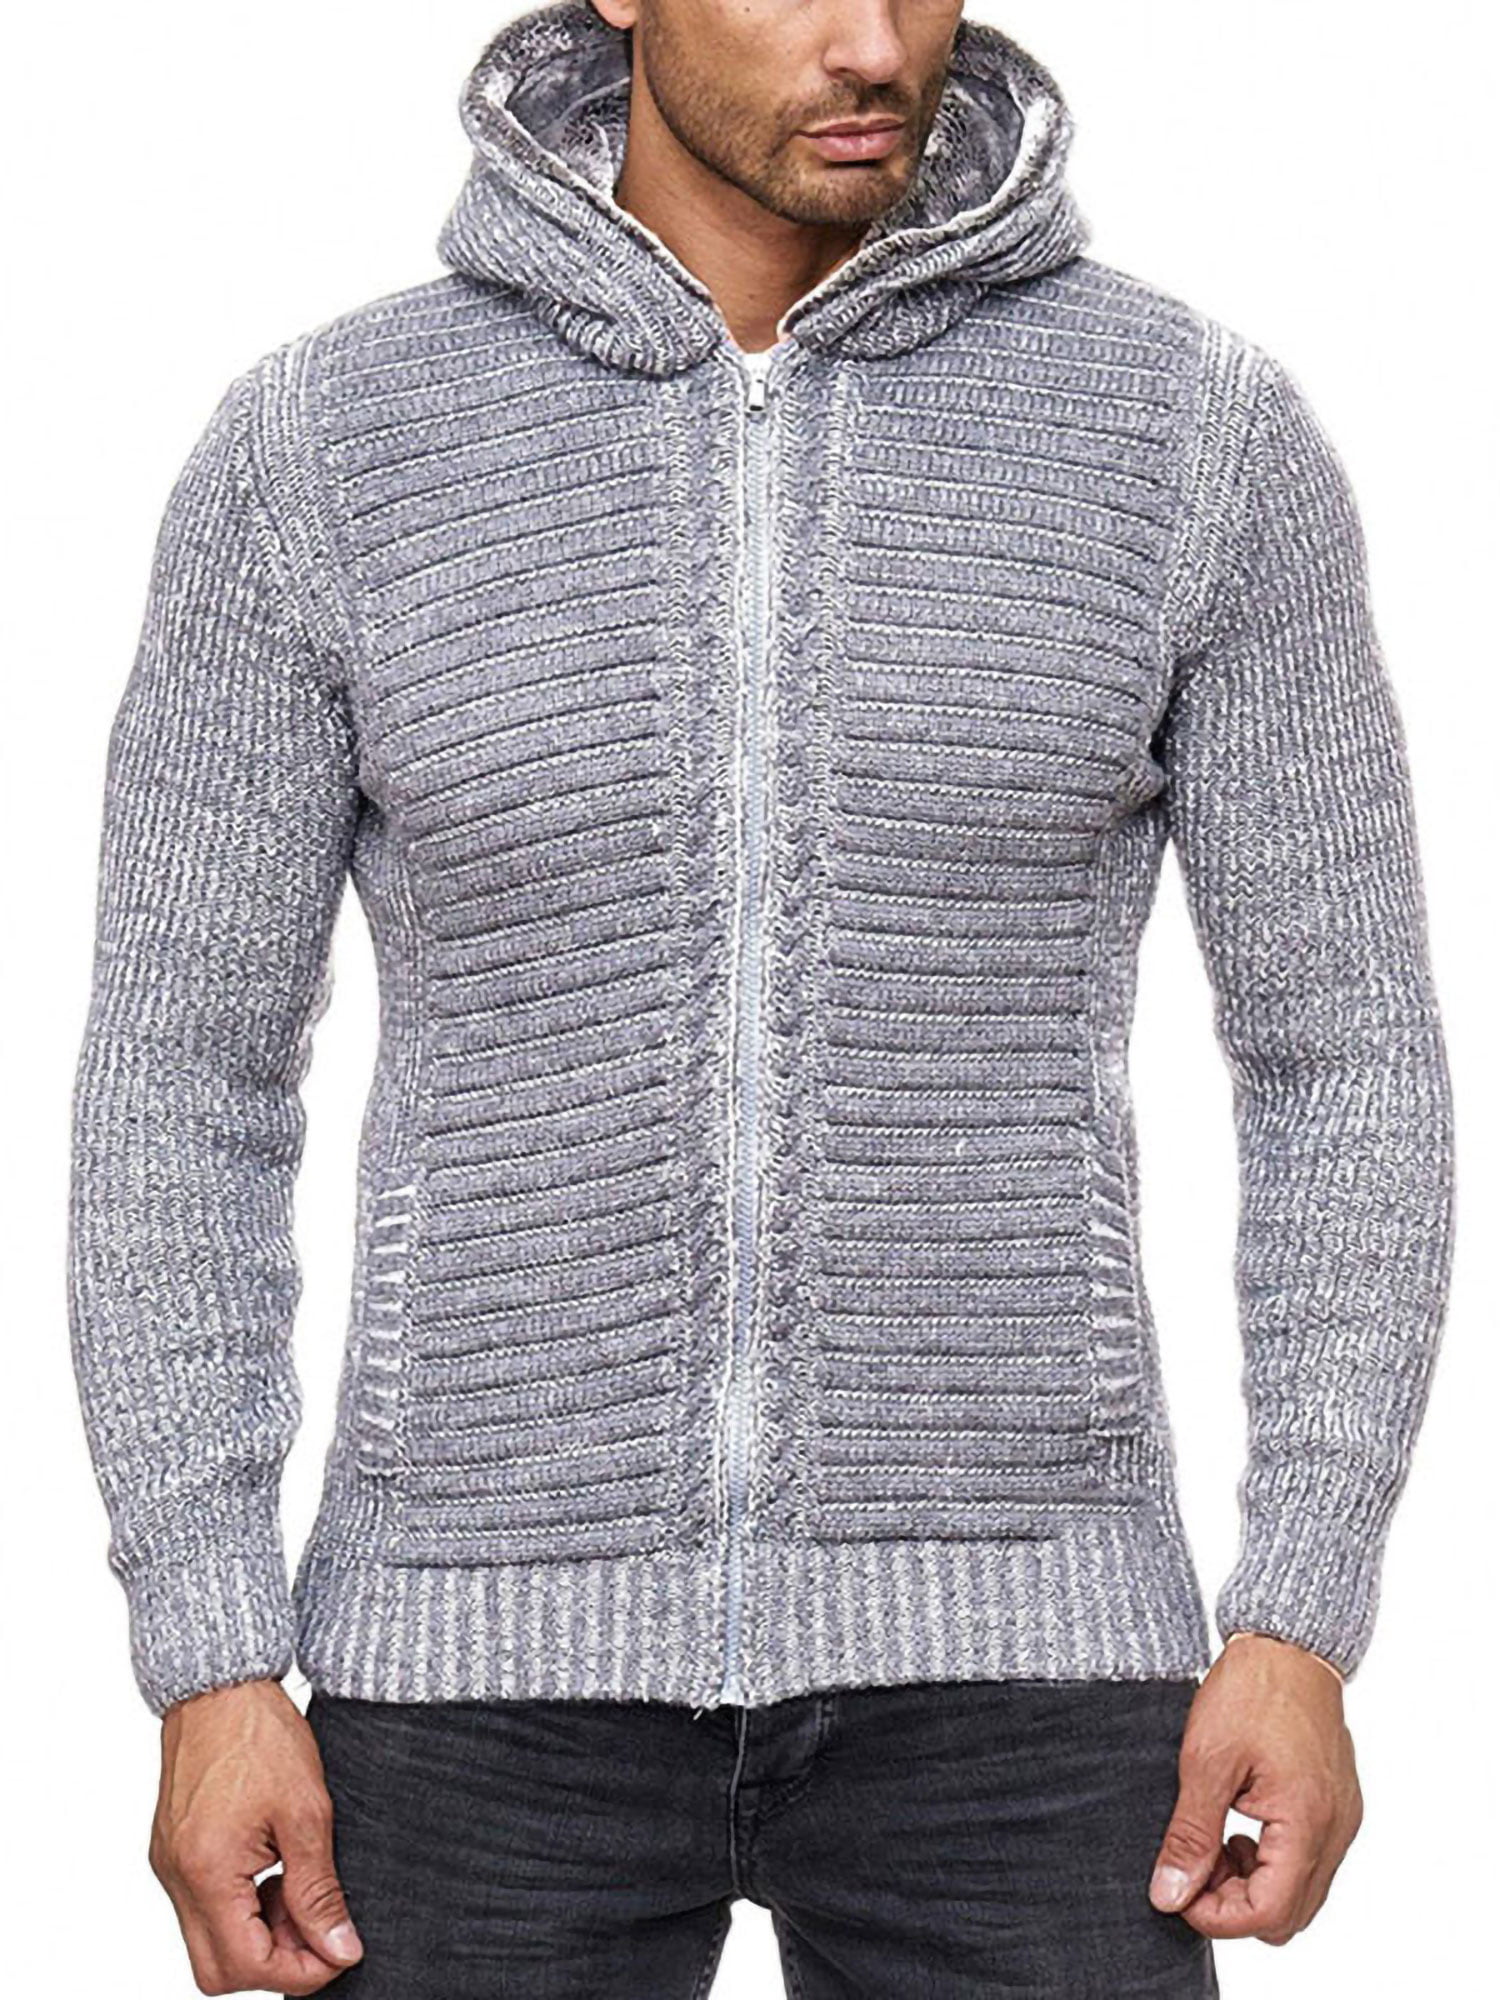 Generic Mens Casual Slim Fit Full Zip Thick Knitted Cardigan Sweater with Pockets 